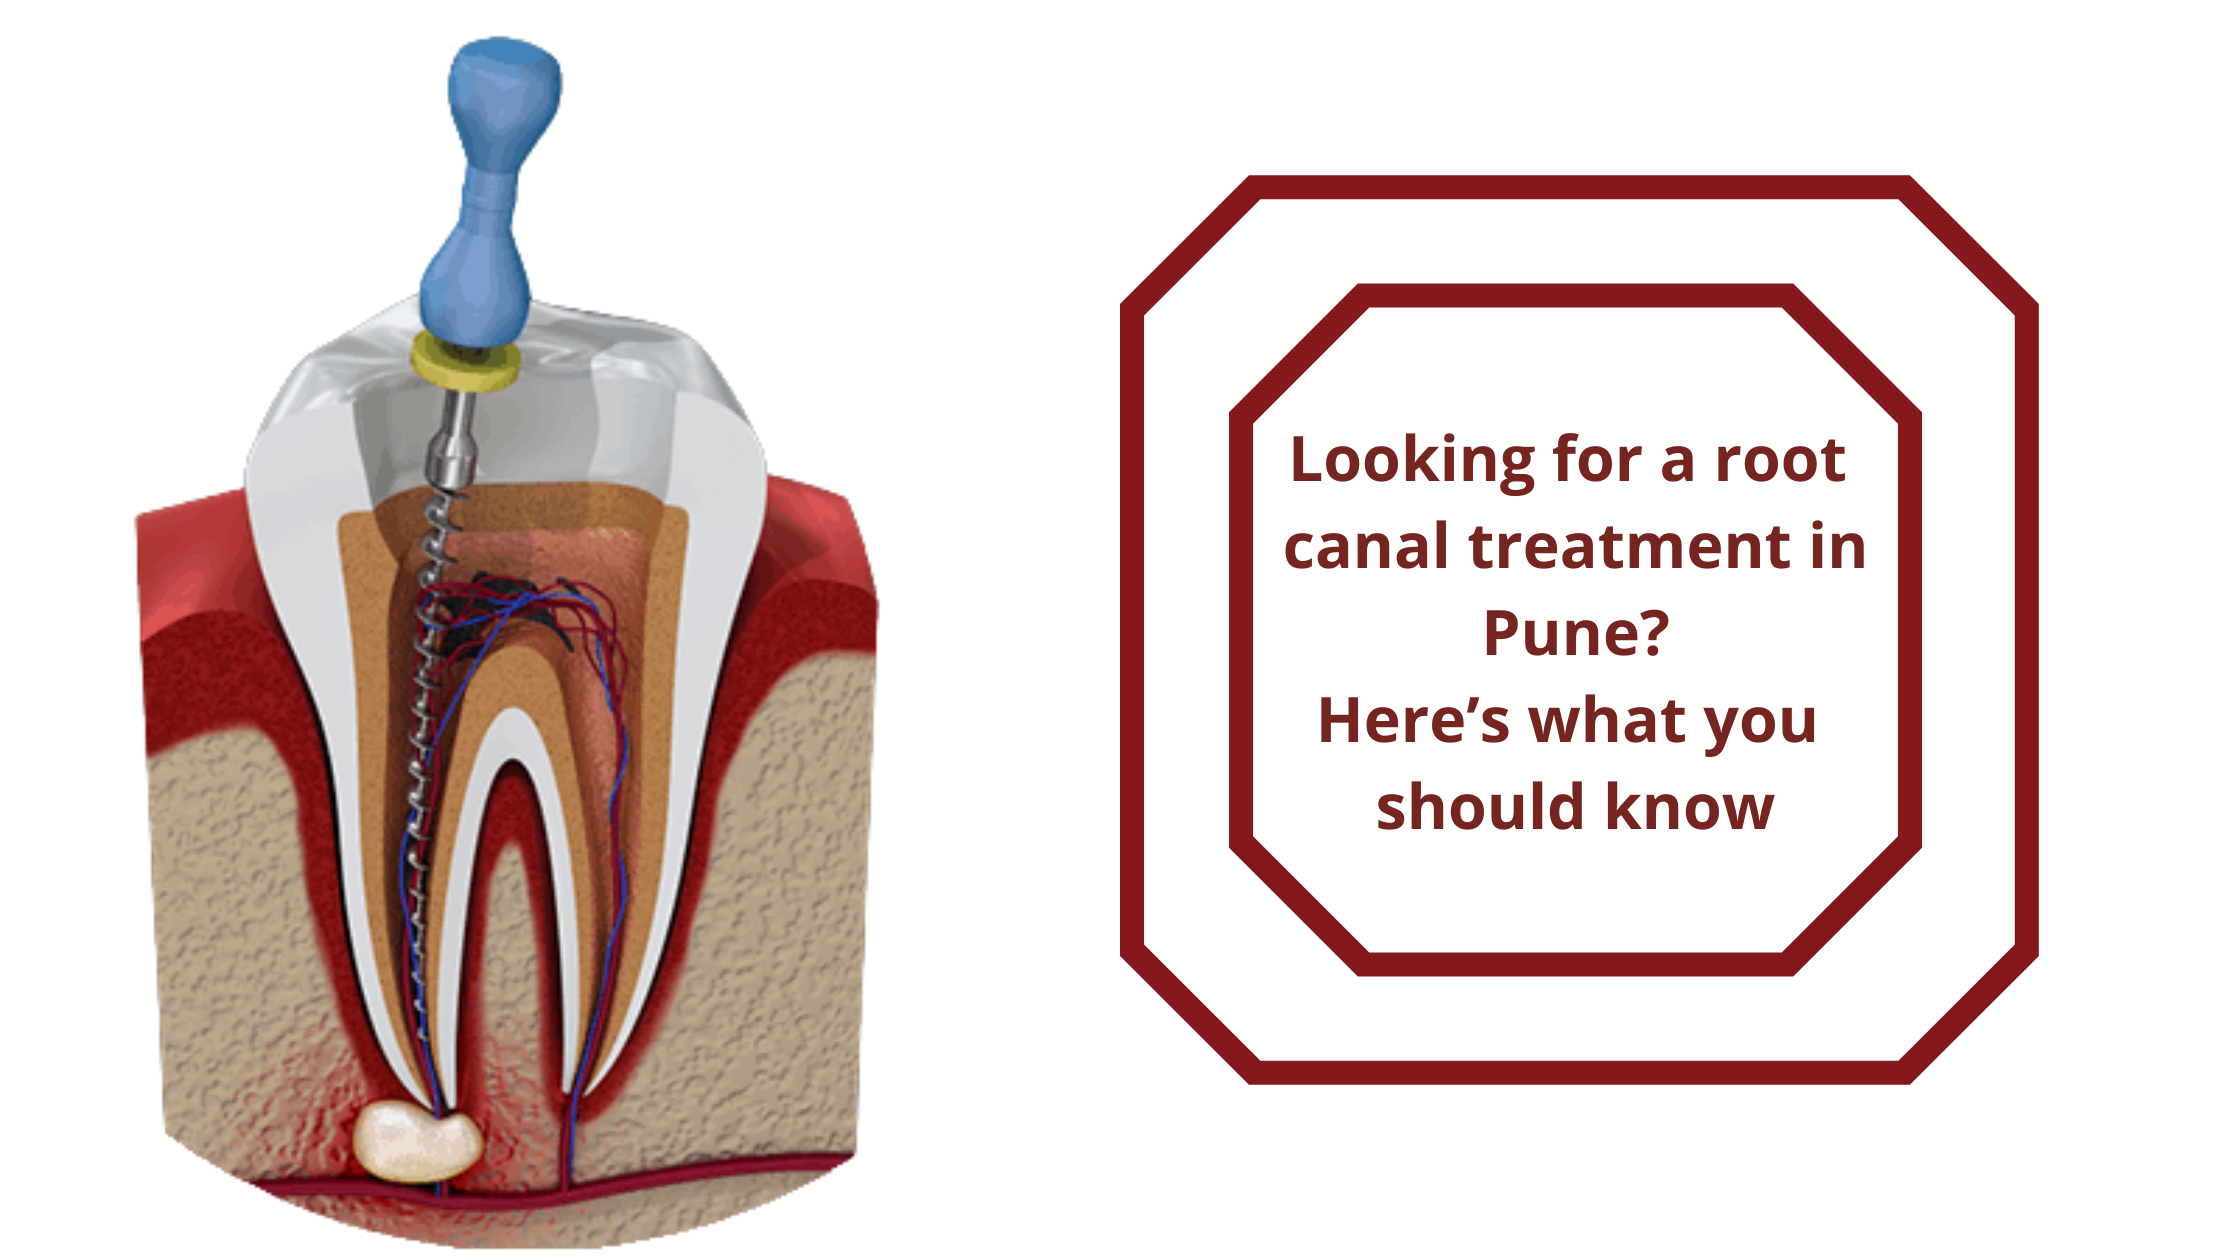 Rootcanal treatment in pune